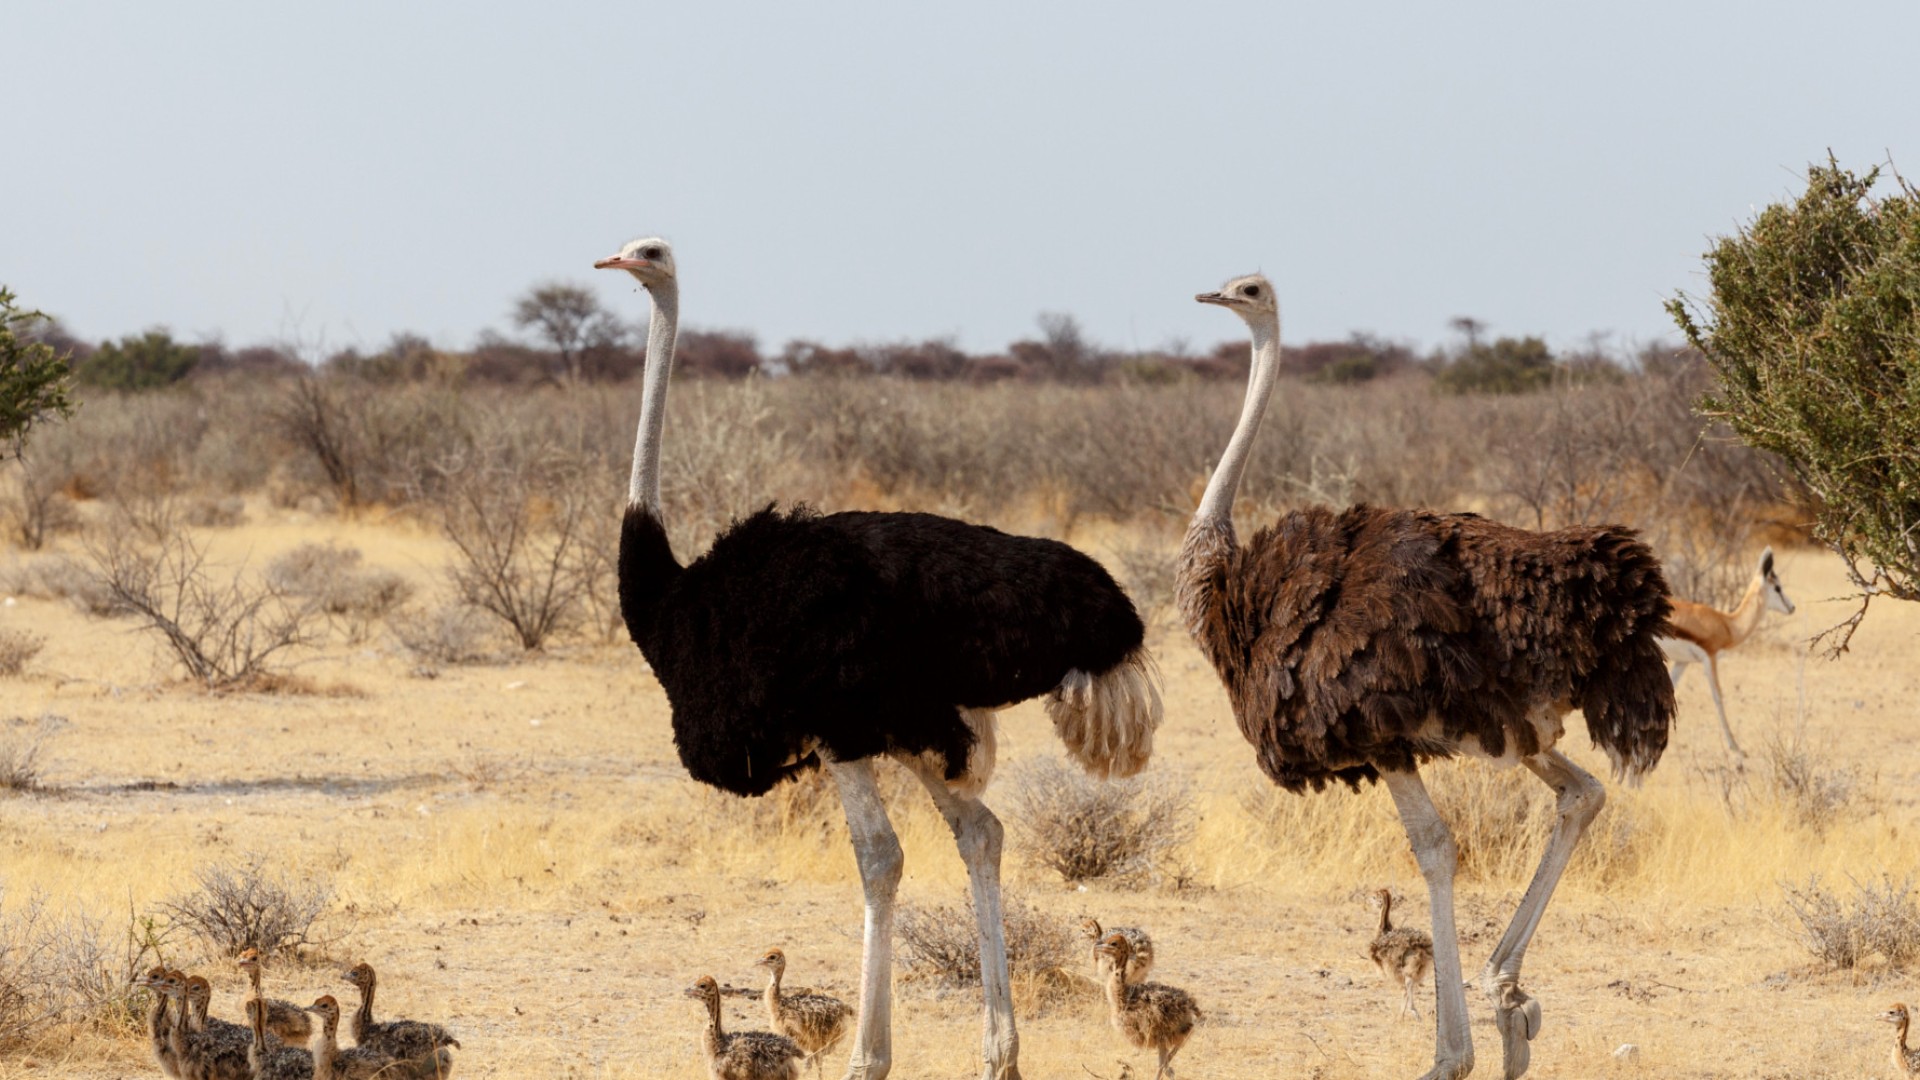 A mom and dad ostrich with a group of their offspring in Namibia desert